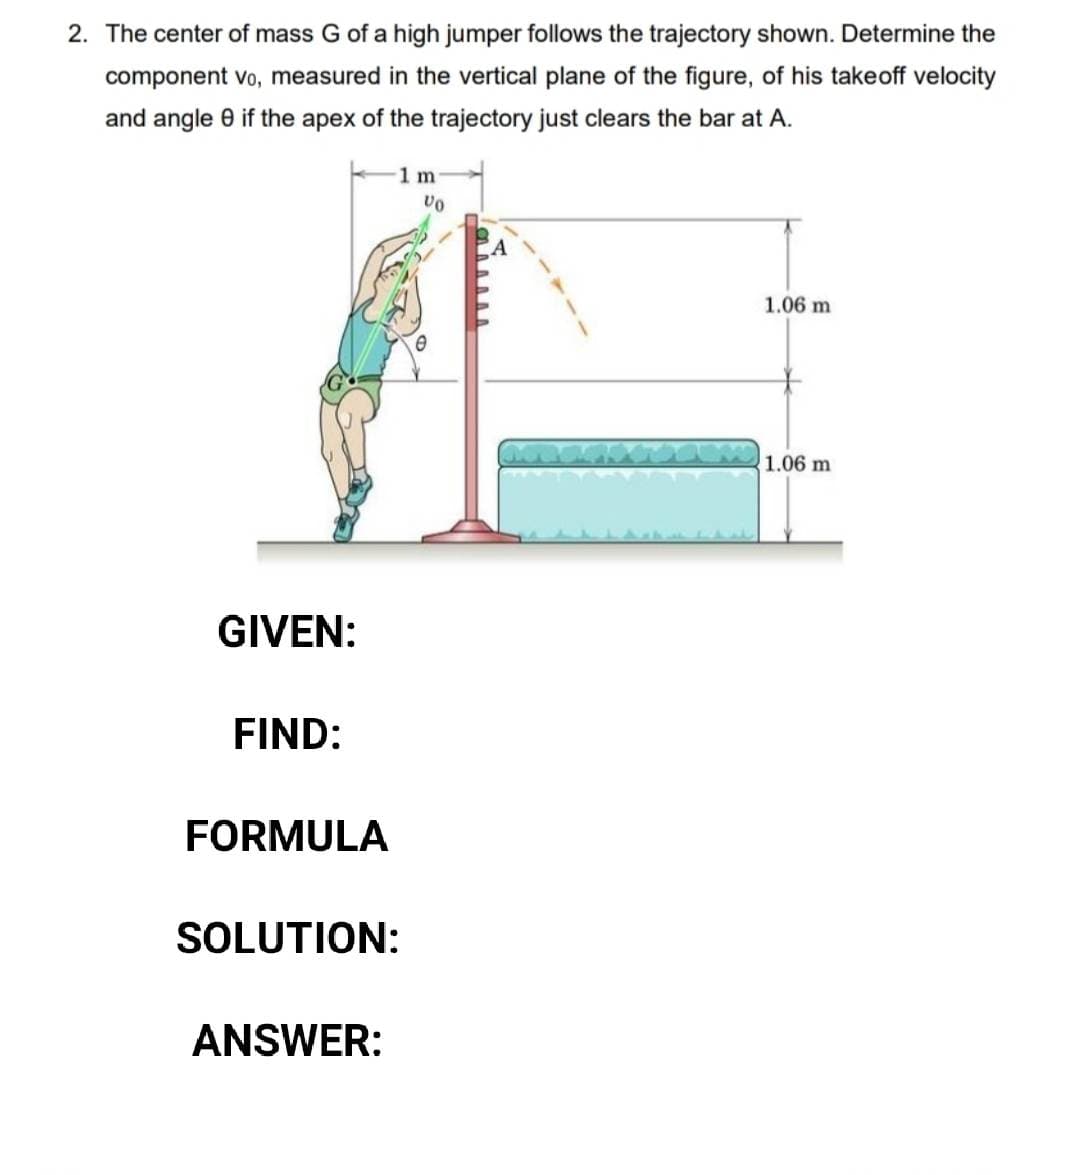 2. The center of mass G of a high jumper follows the trajectory shown. Determine the
component vo, measured in the vertical plane of the figure, of his takeoff velocity
and angle 8 if the apex of the trajectory just clears the bar at A.
GIVEN:
FIND:
FORMULA
SOLUTION:
ANSWER:
1 m
Vo
1.06 m
1.06 m